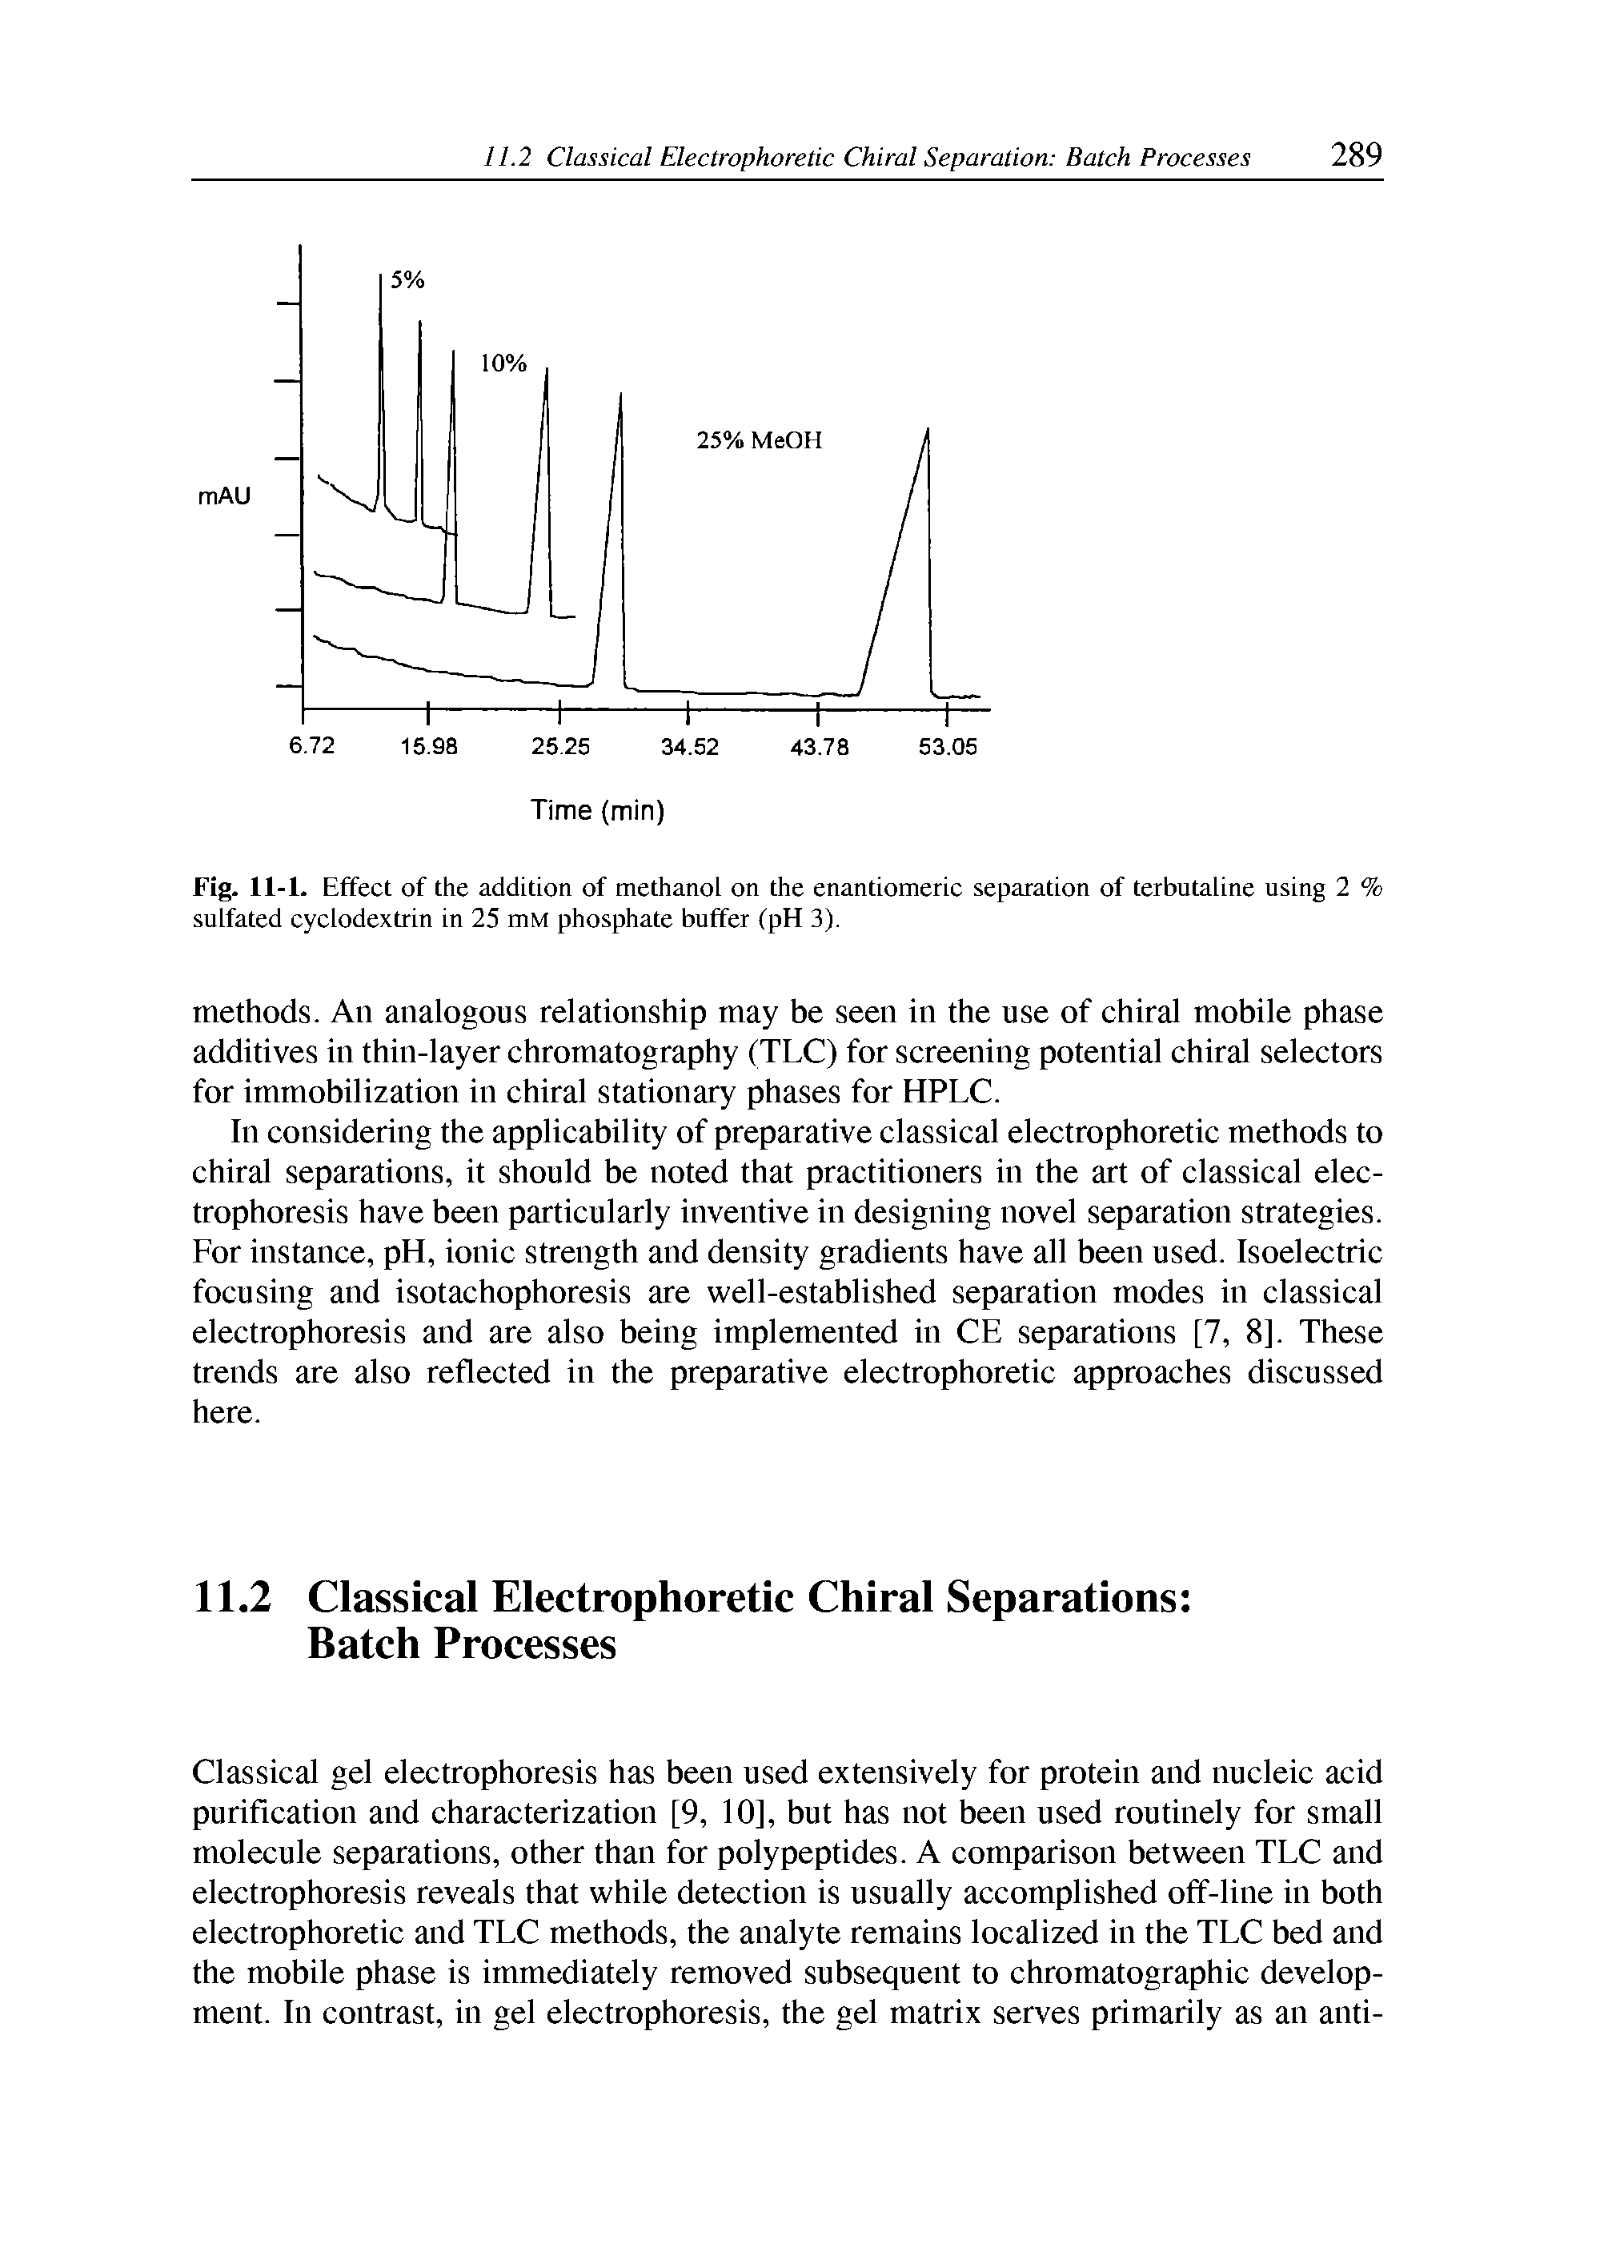 Fig. 11-1. Effect of the addition of methanol on the enantiomeric separation of terbutaline using 2 % sulfated cyclodextrin in 25 mM phosphate buffer (pH 3).